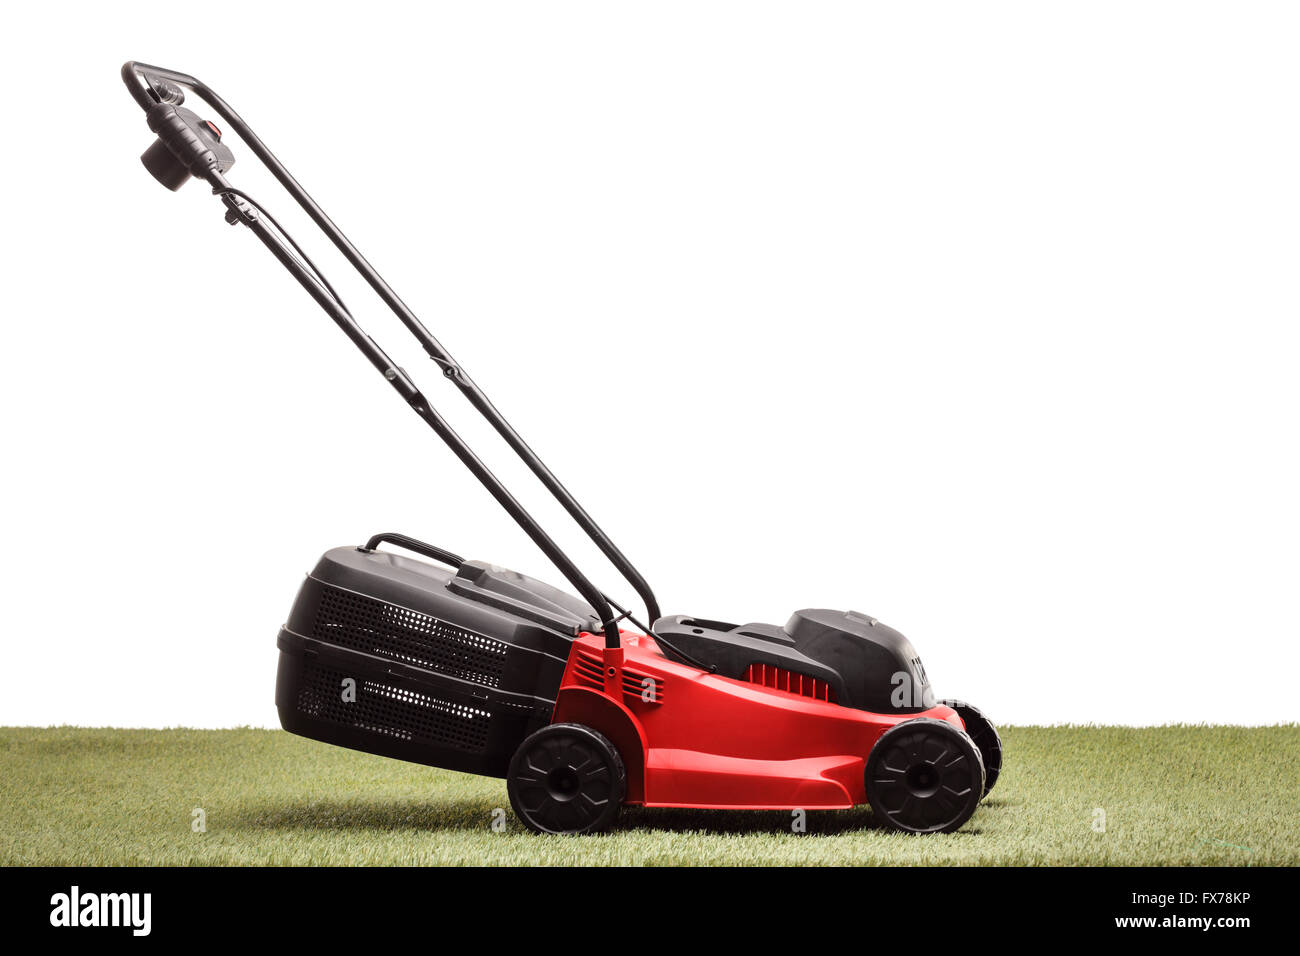 Lawn mower on grass isolated on white background Stock Photo